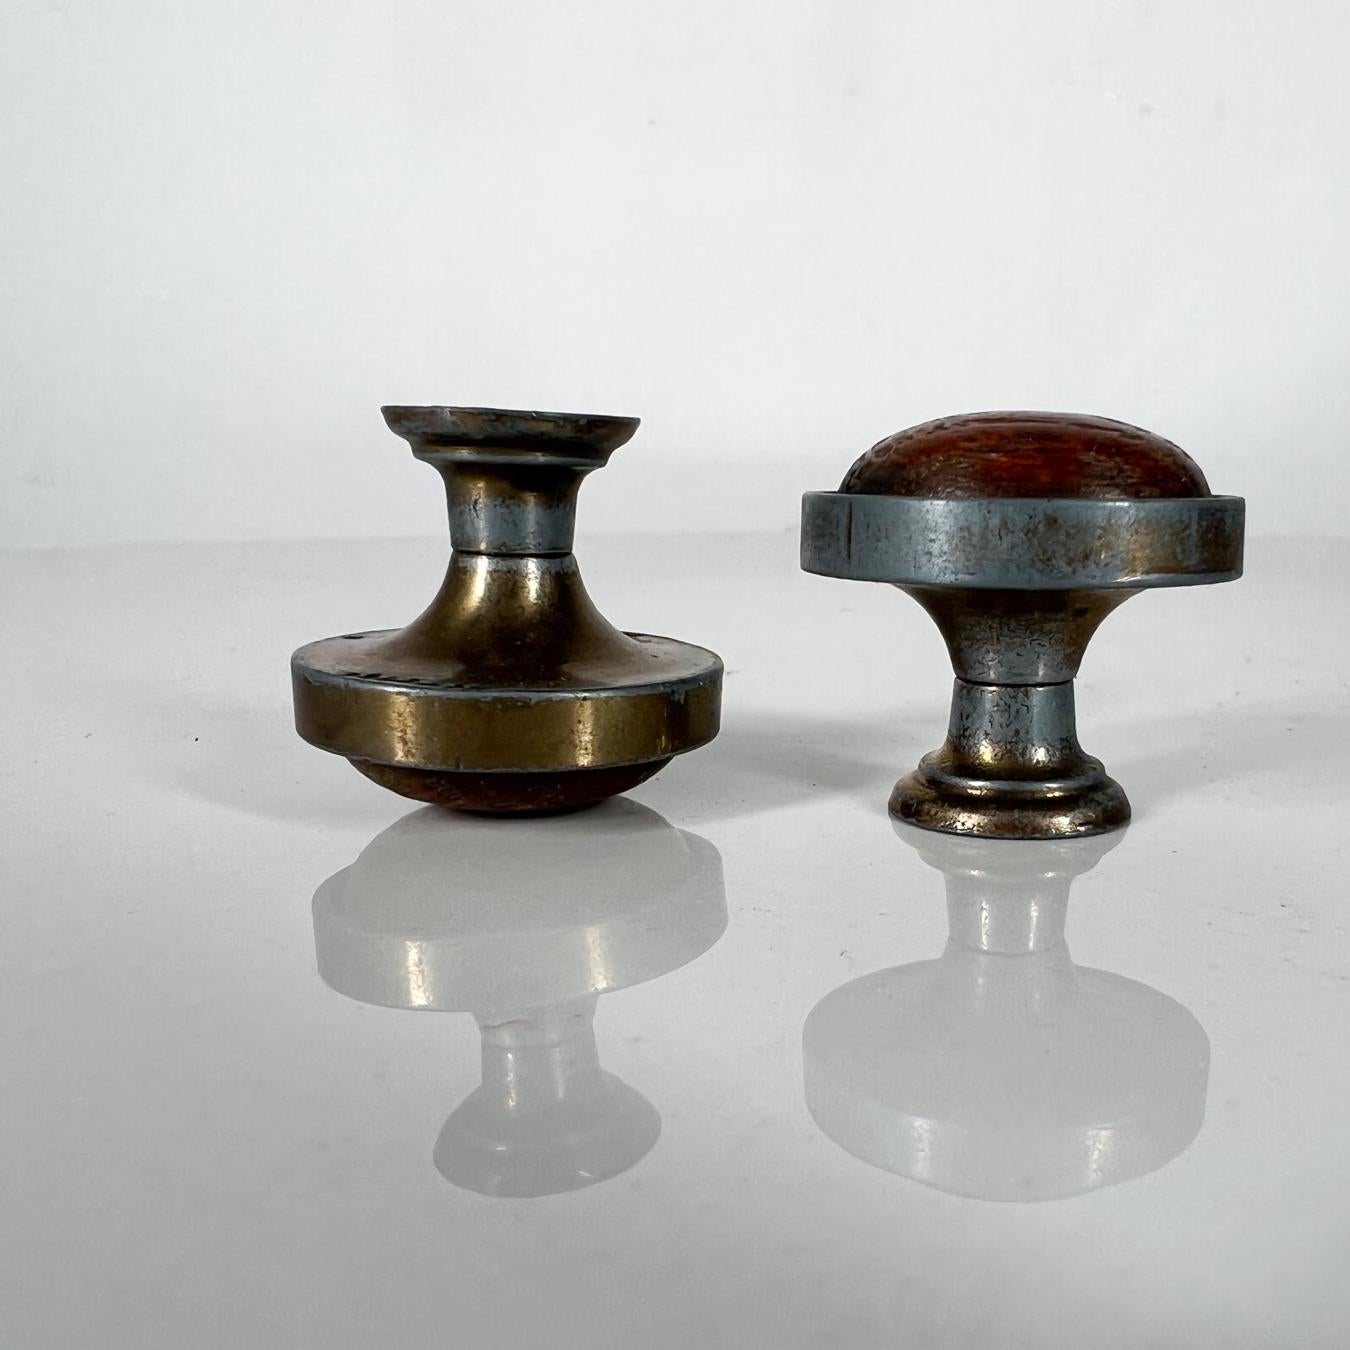 Vintage Hardware Drawer Pulls Brass Knobs with Wood Insert Set of 2 Canada For Sale 3